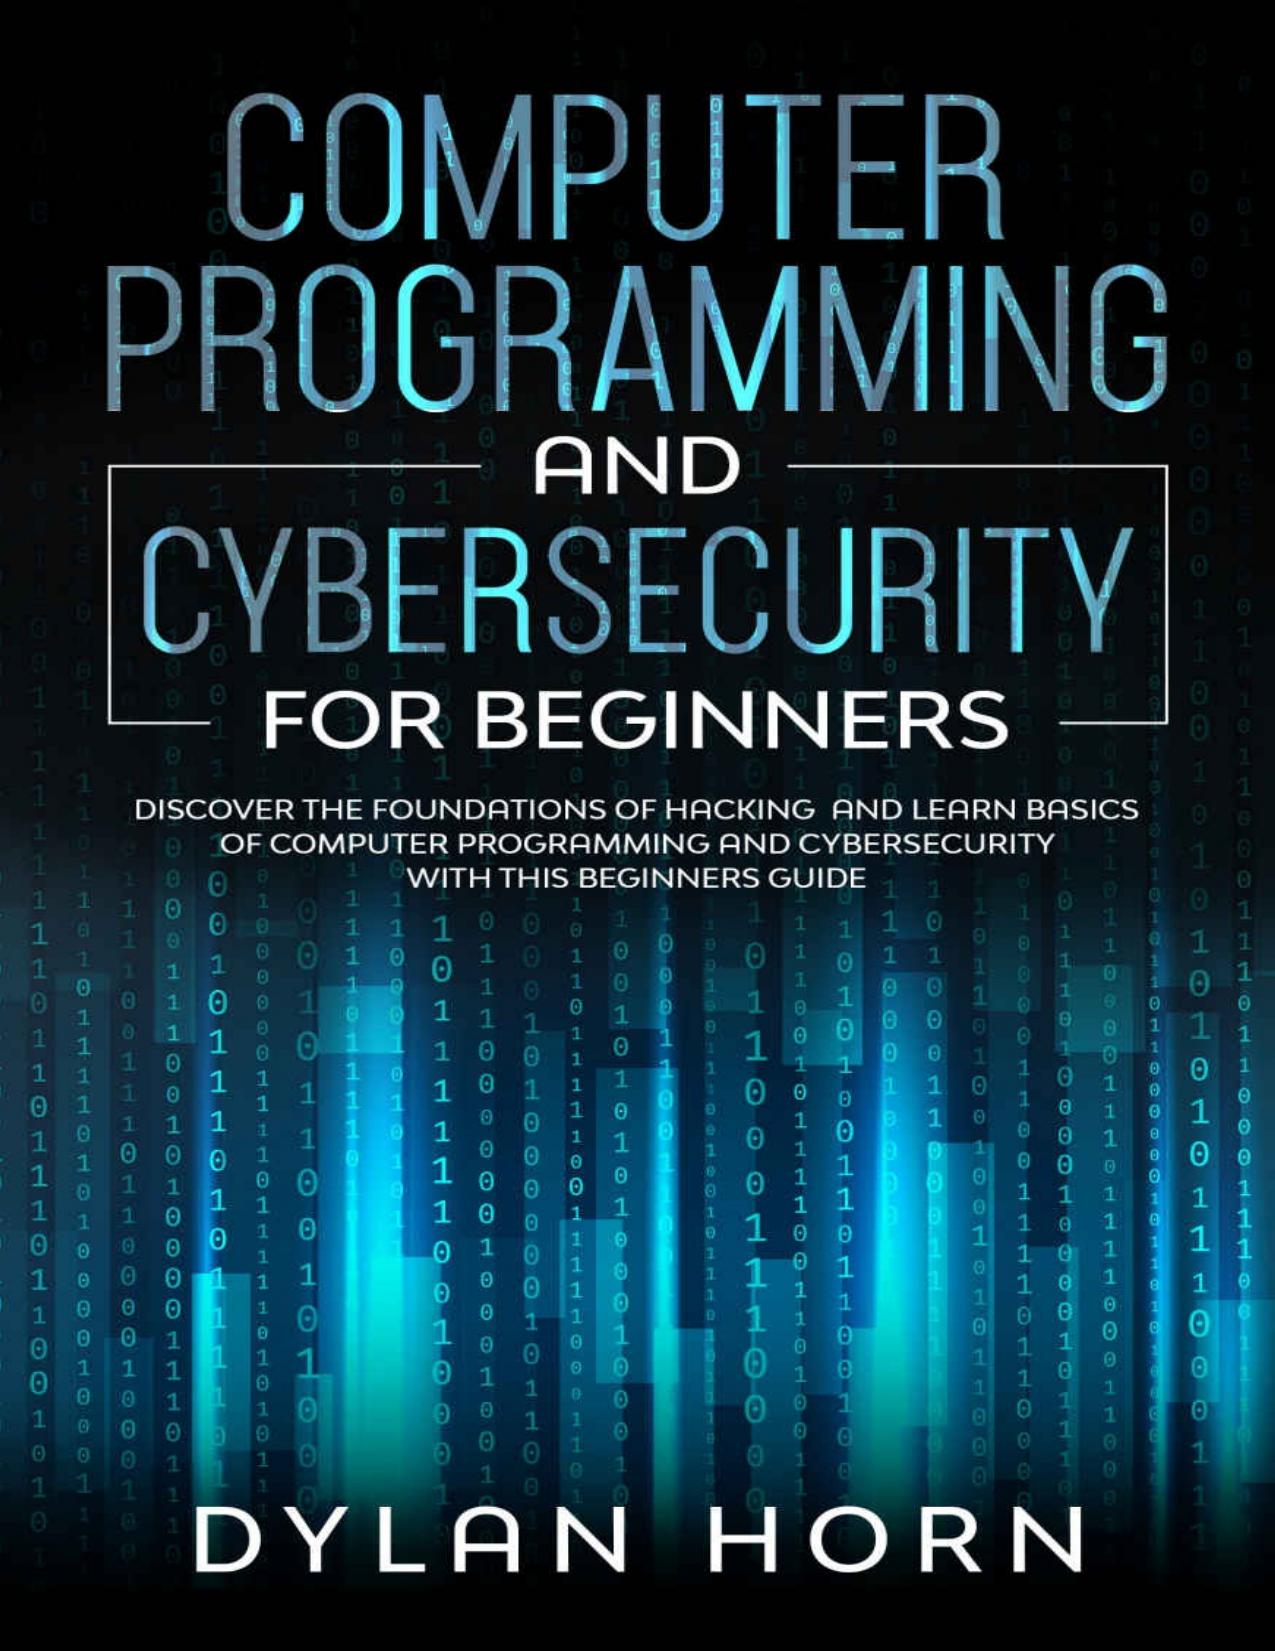 Computer Programming and Cybersecurity For Beginners_ Discover amming and Cybersecurity with this Beginners Guide - Dylan Horn.jpg